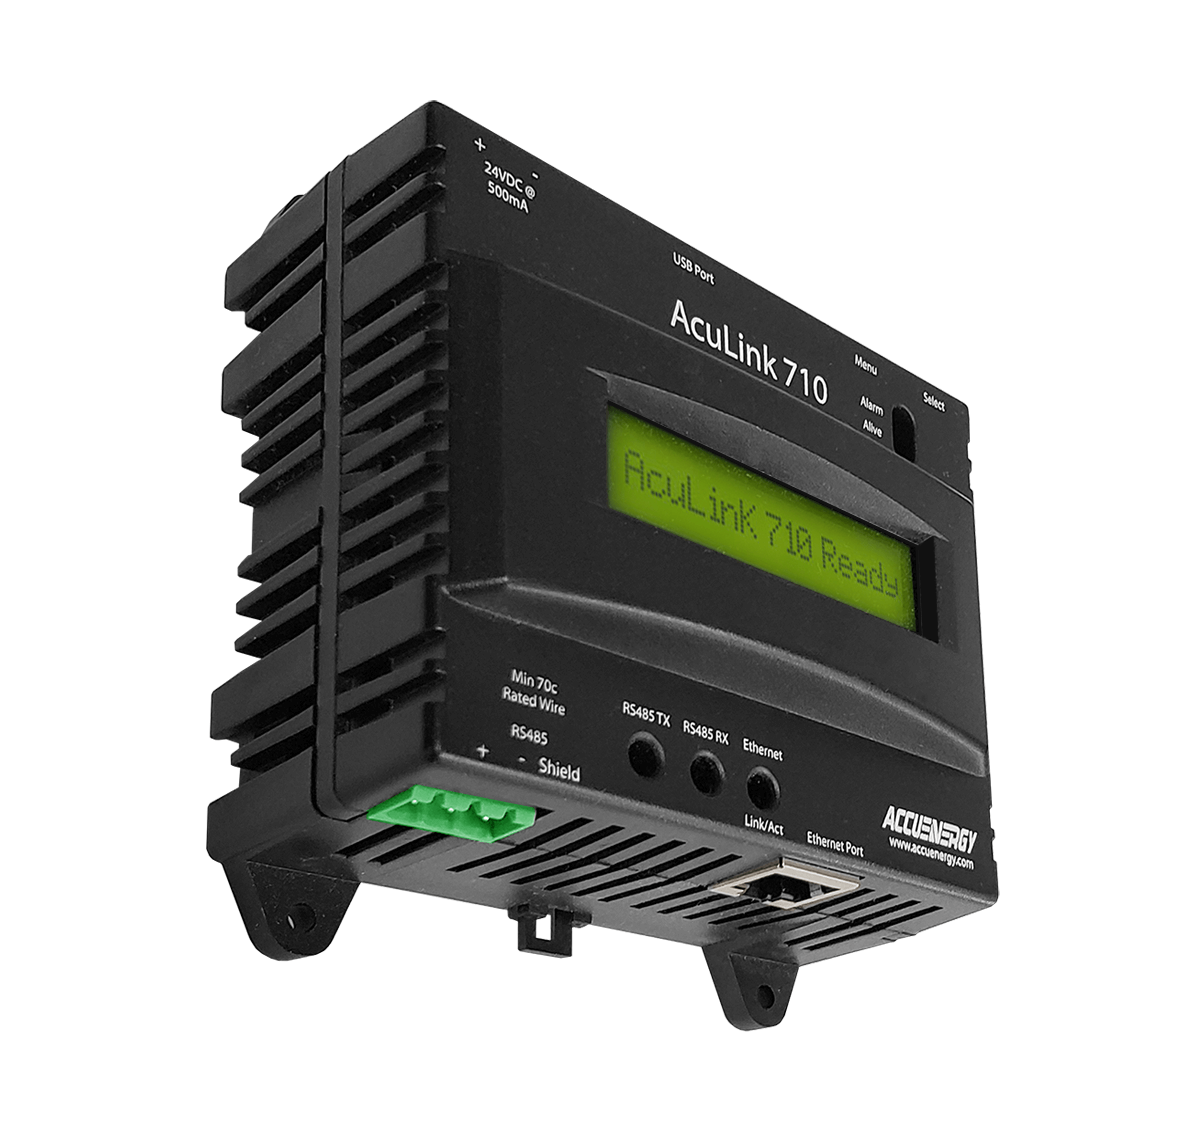 Data Acquisition Server - AcuLink 710